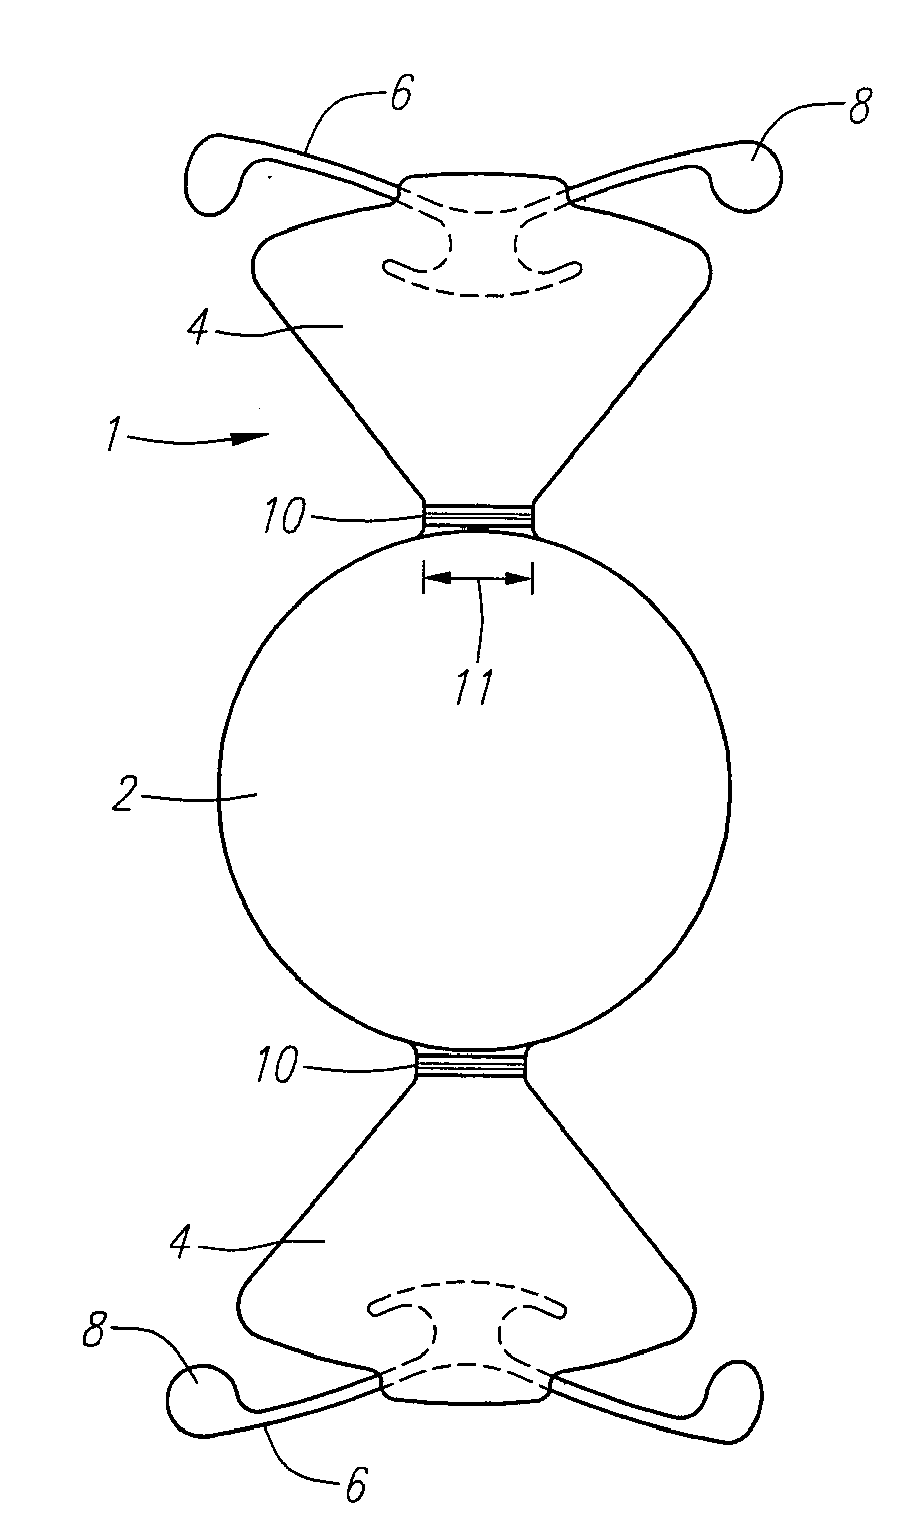 Stabilized accommodating intraocular lens